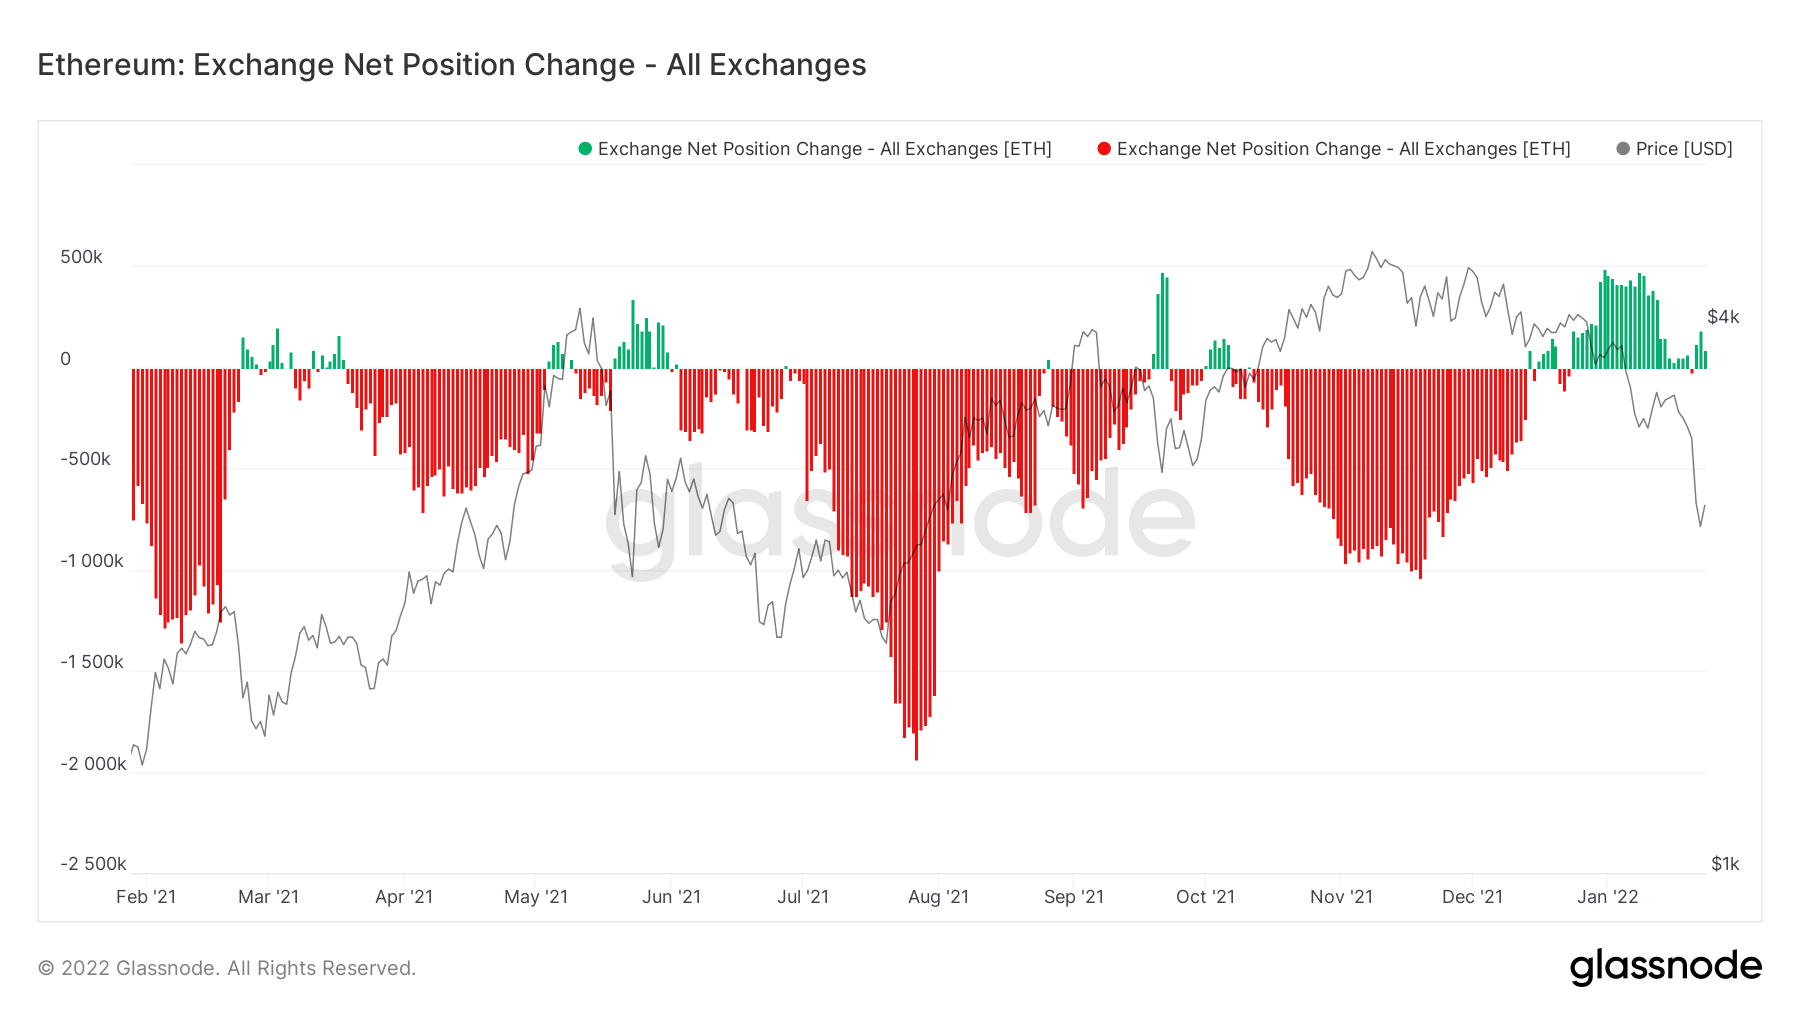 Ethereum Net Position Change- All exchanges